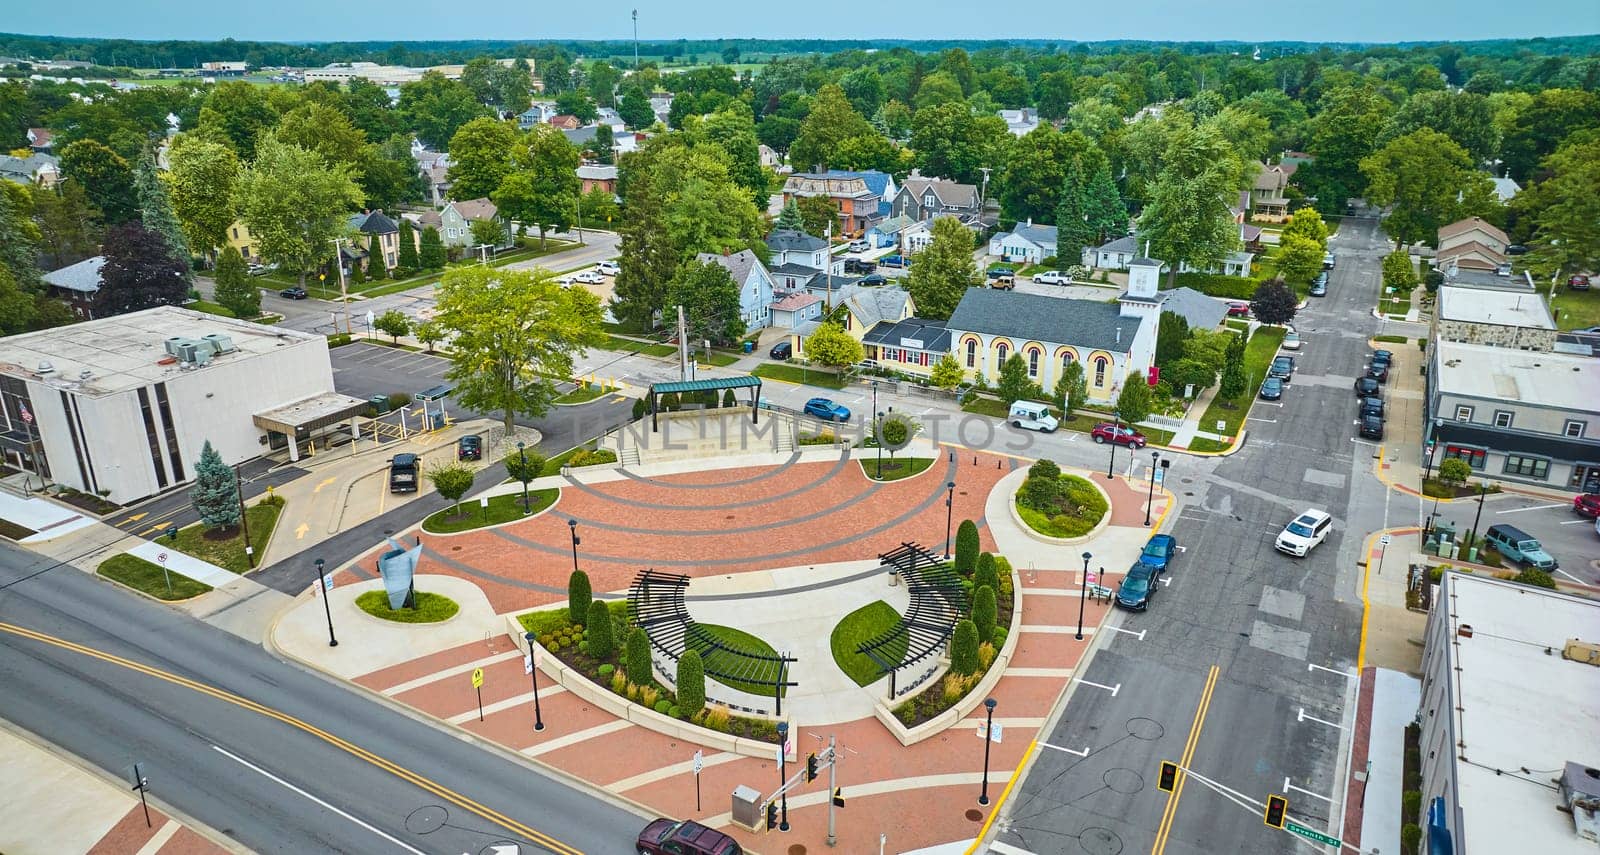 Image of James Cultural Plaza in Auburn with houses and church aerial